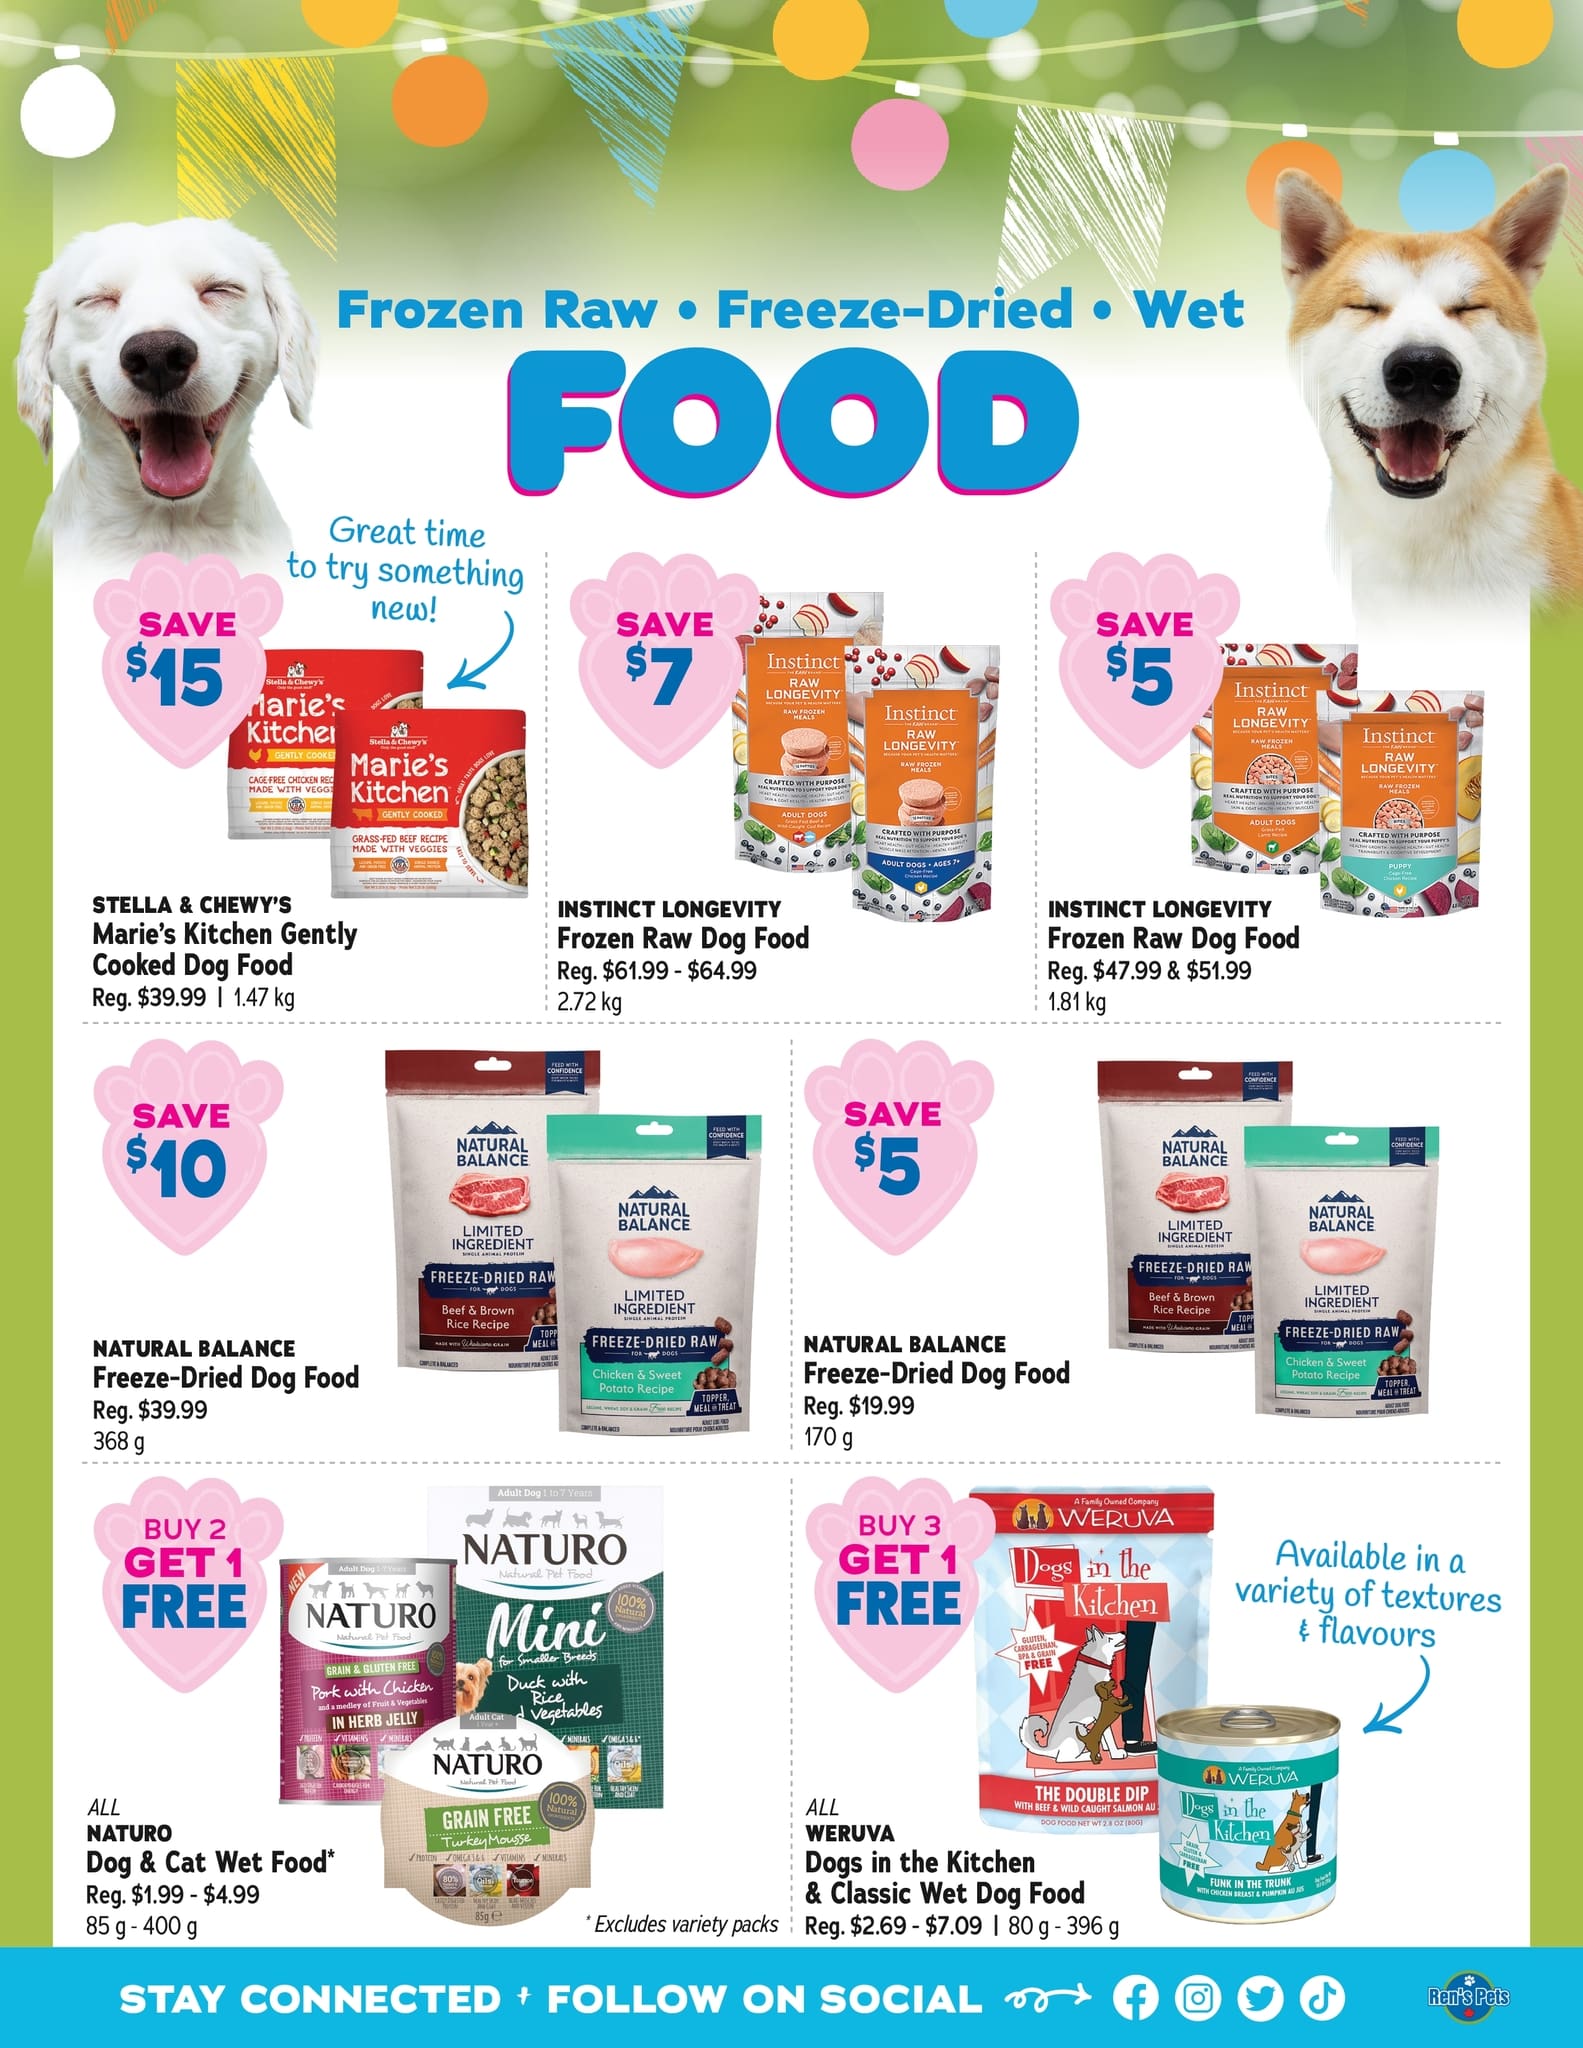 Ren’s Pets Depot - Monthly Savings - Page 7